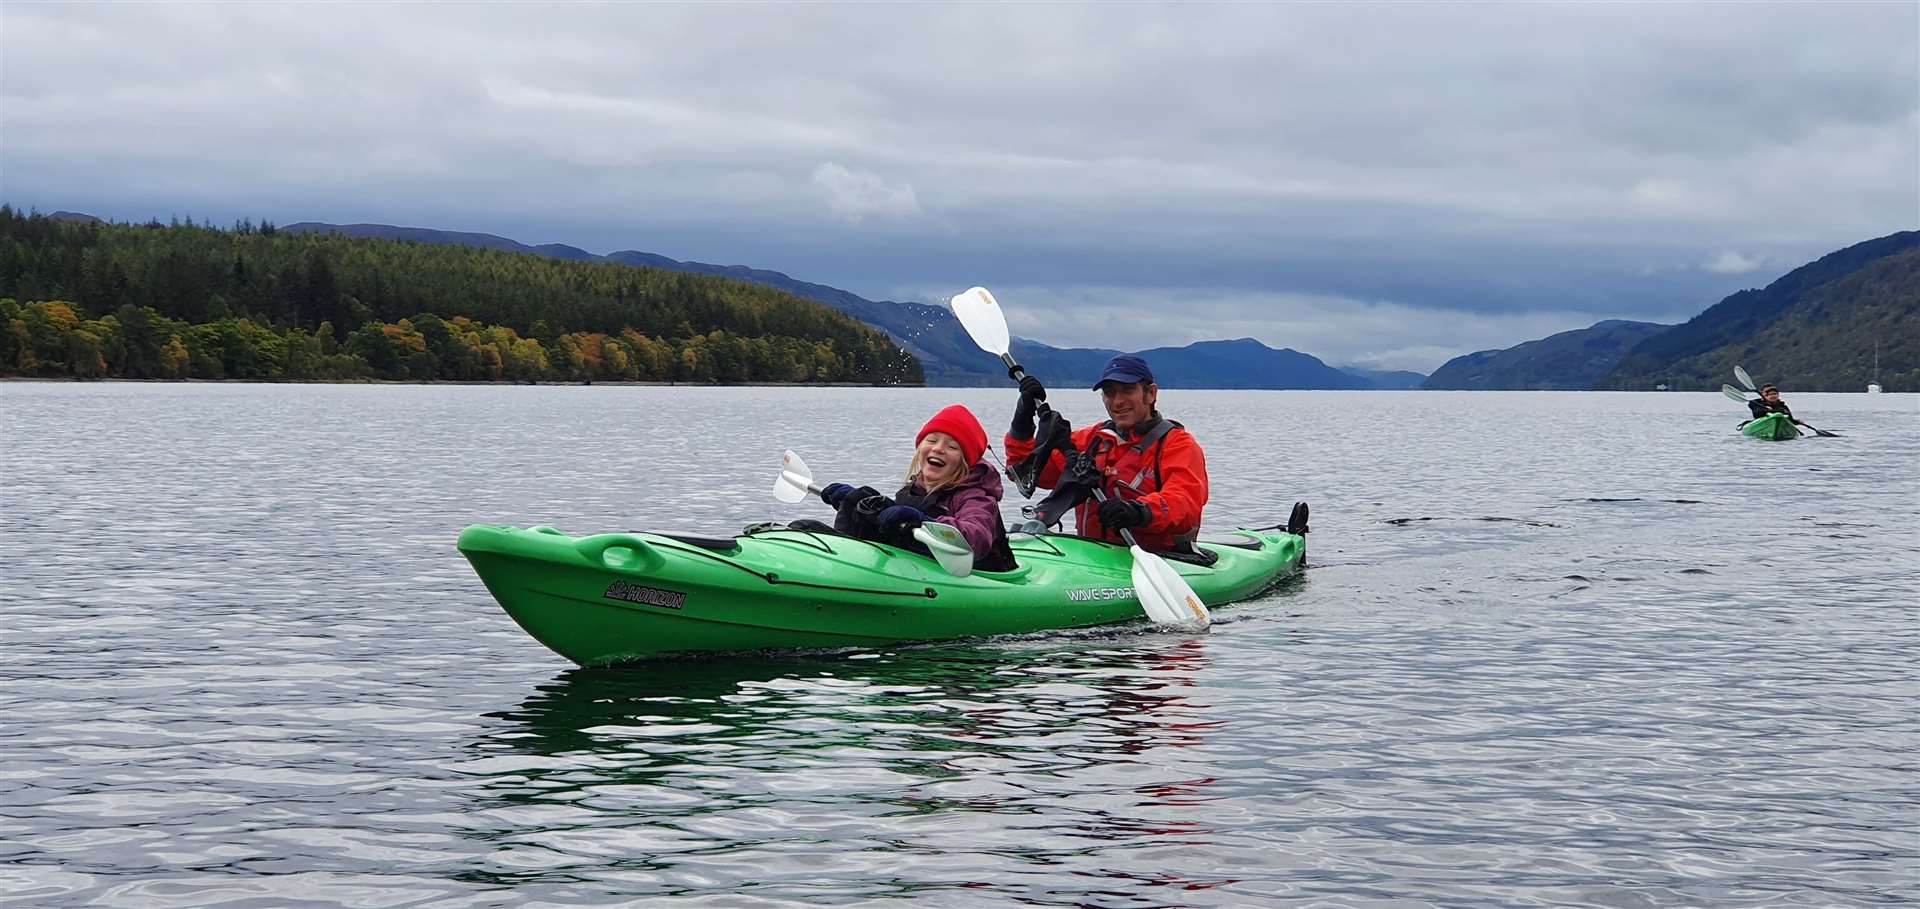 Kayaking Loch Ness with Explore Highland. Picture: Explore Highland